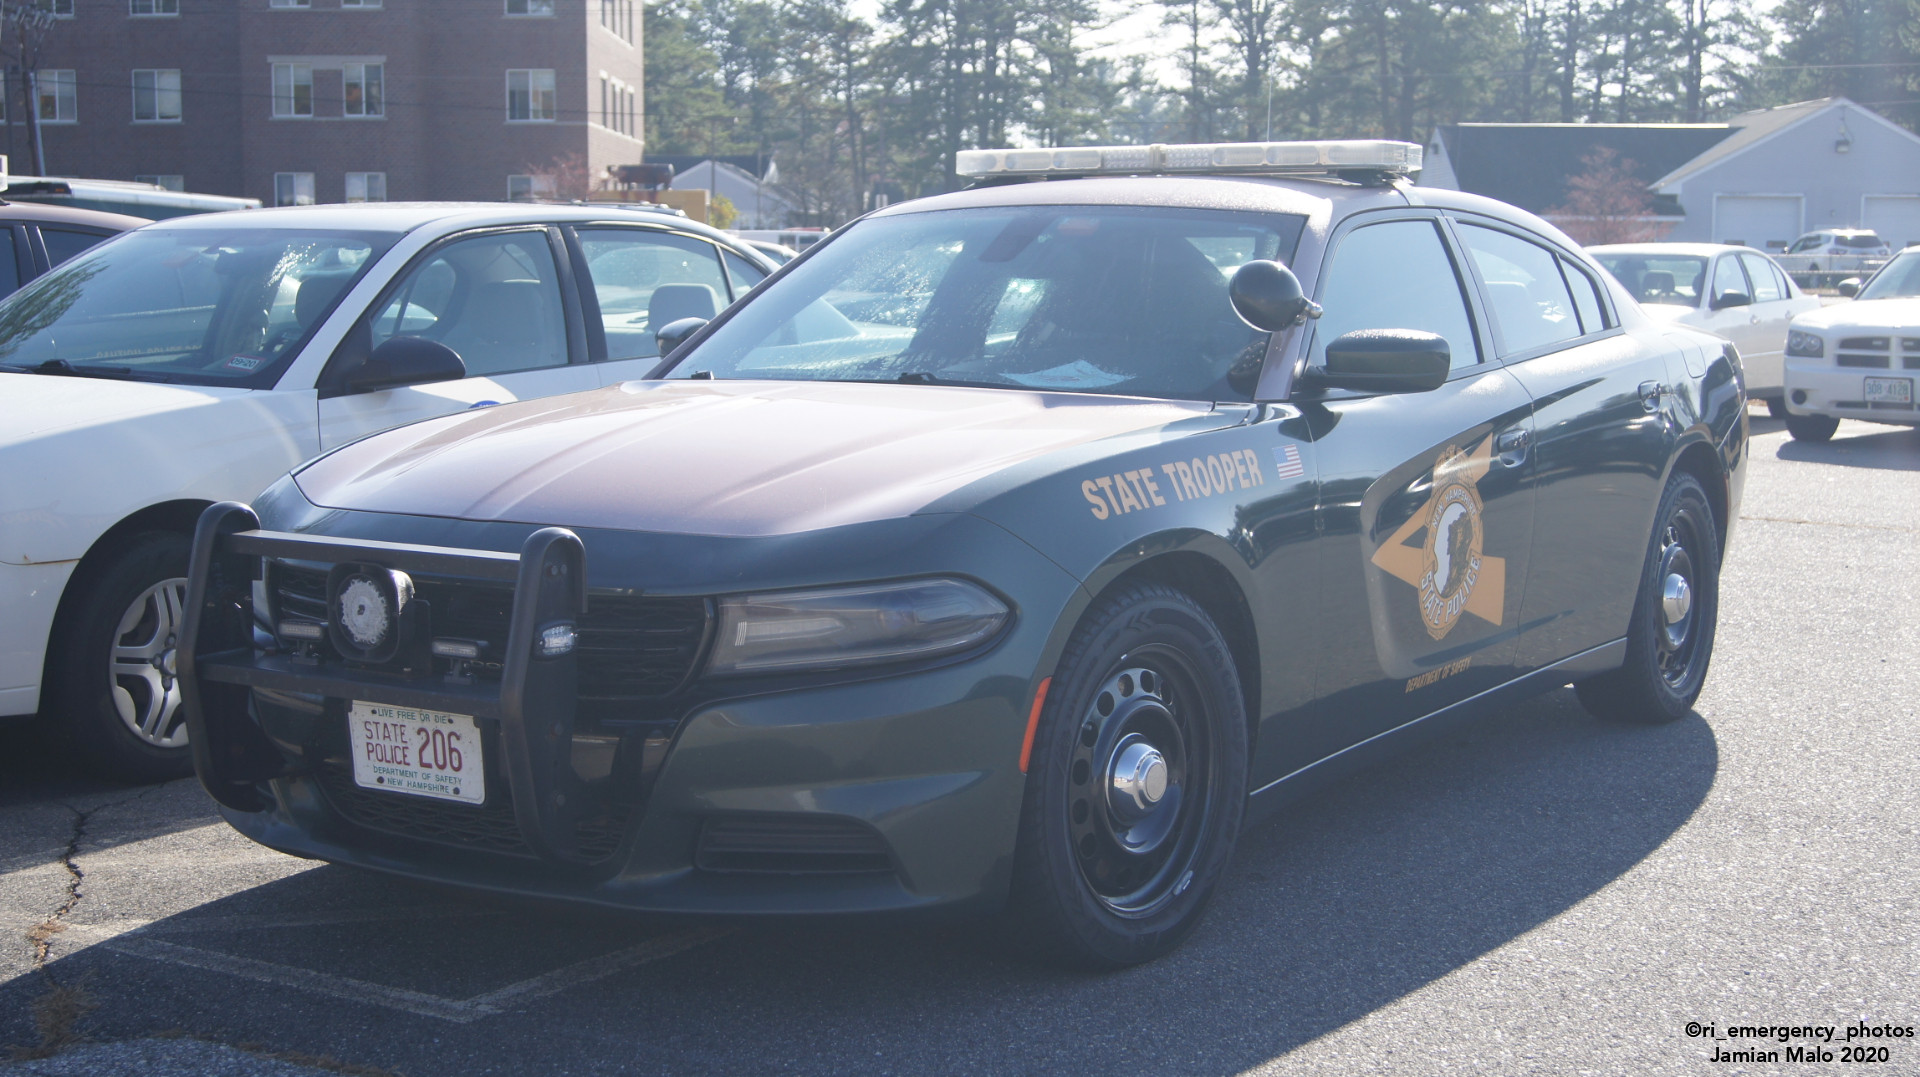 A photo  of New Hampshire State Police
            Cruiser 206, a 2015-2019 Dodge Charger             taken by Jamian Malo